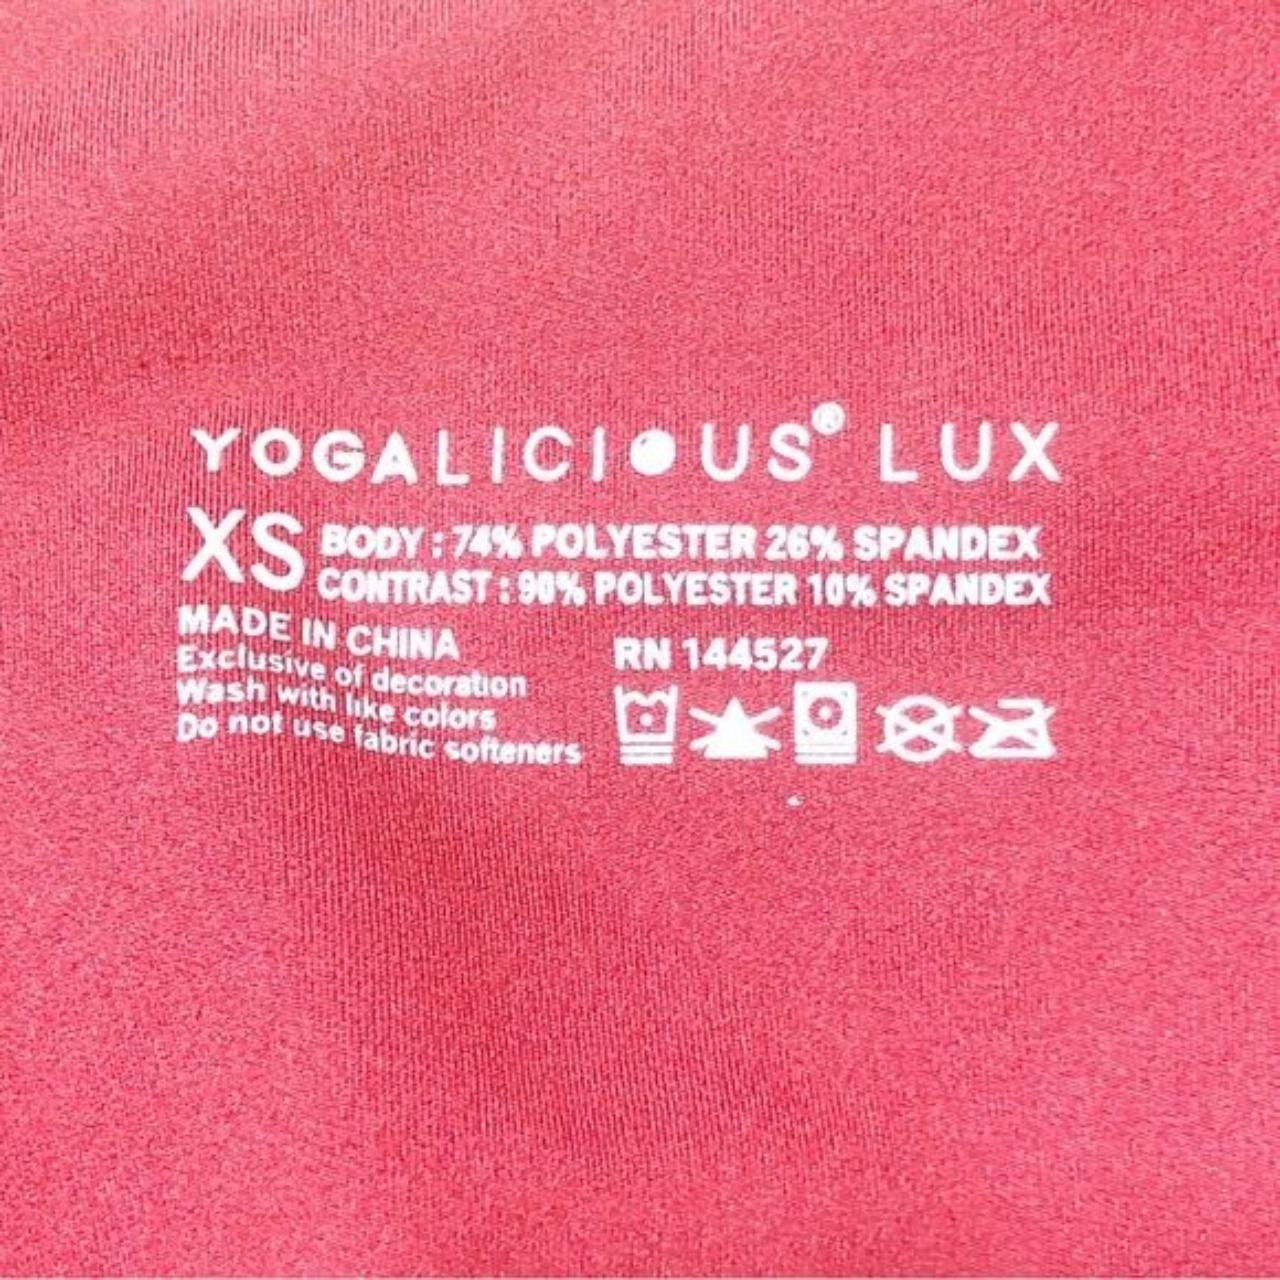 Yogalicious leggings -dusty rose color -stretchy, - Depop